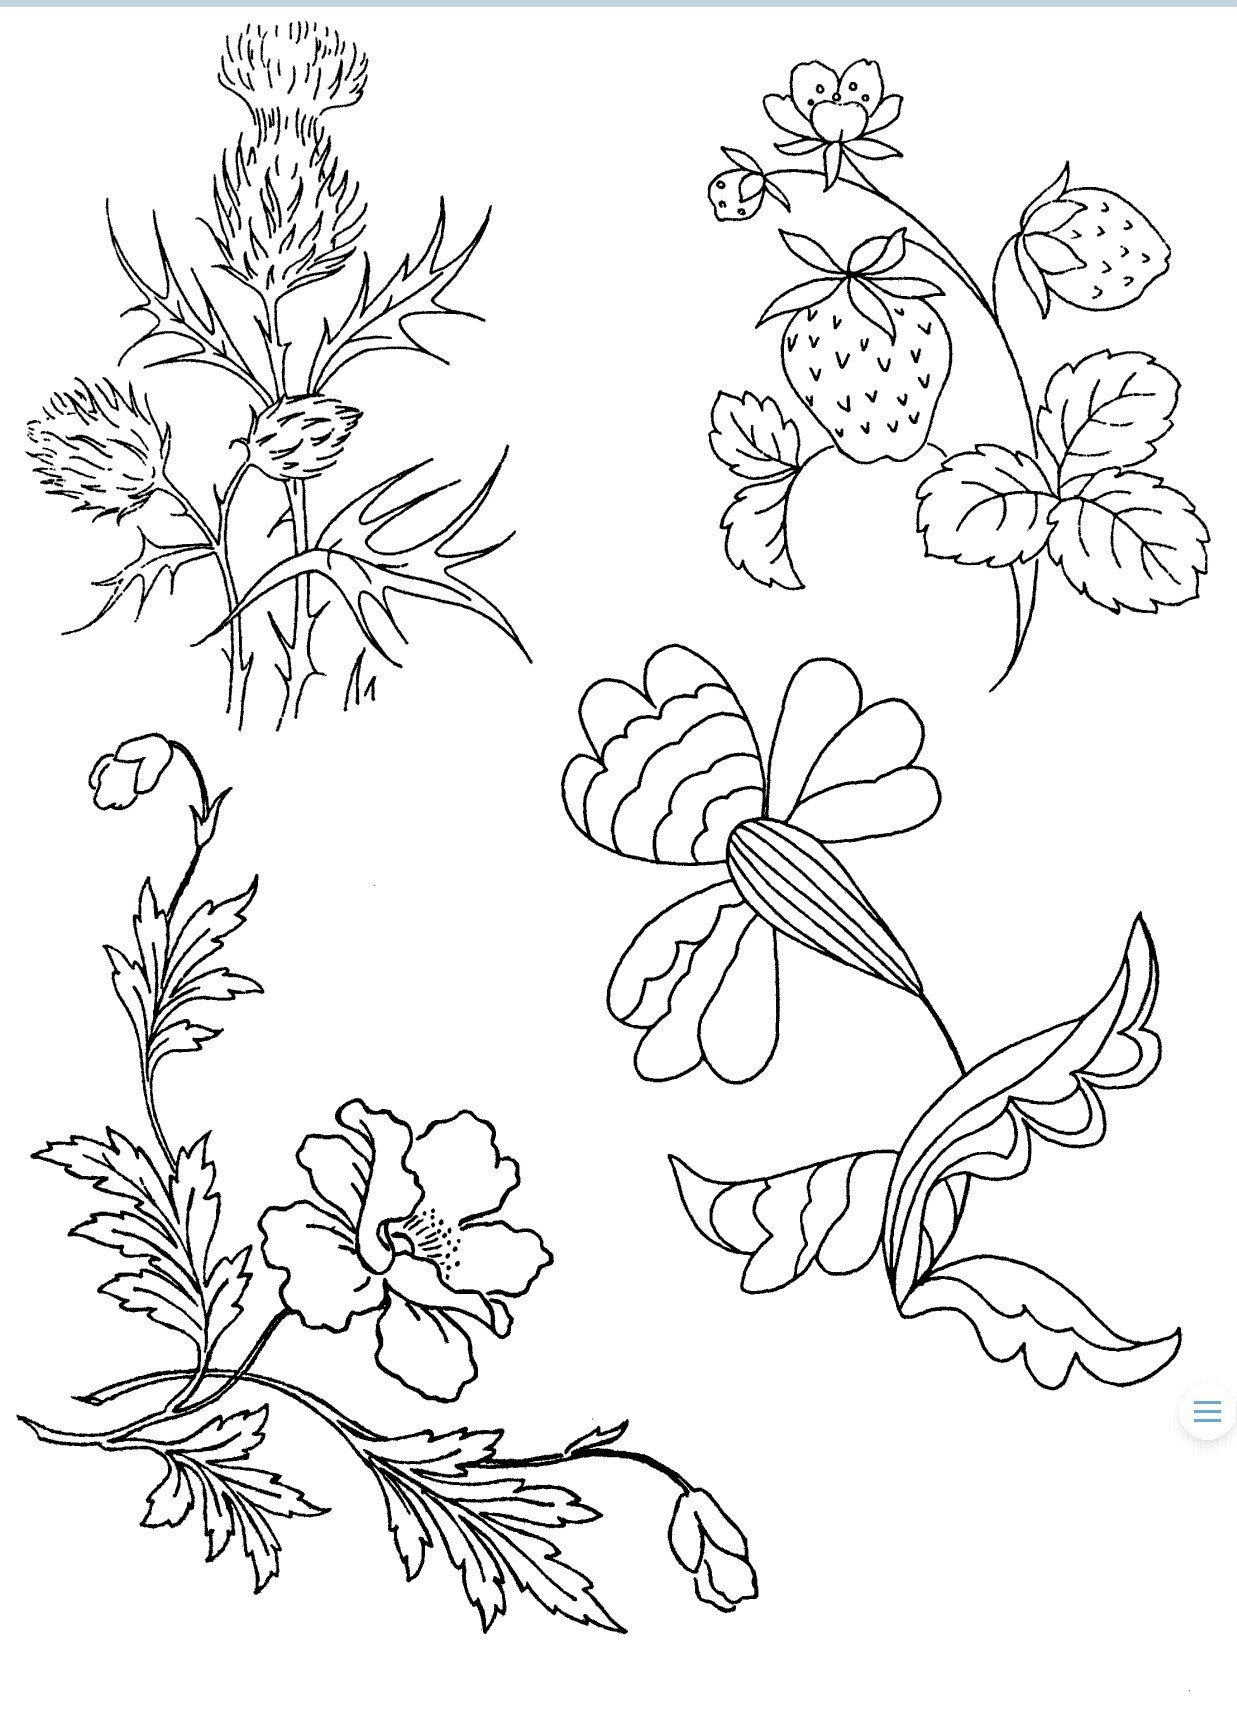 Free Vintage Embroidery Patterns Download Embroidery Patterns Free Pdf Lots Of Patterns